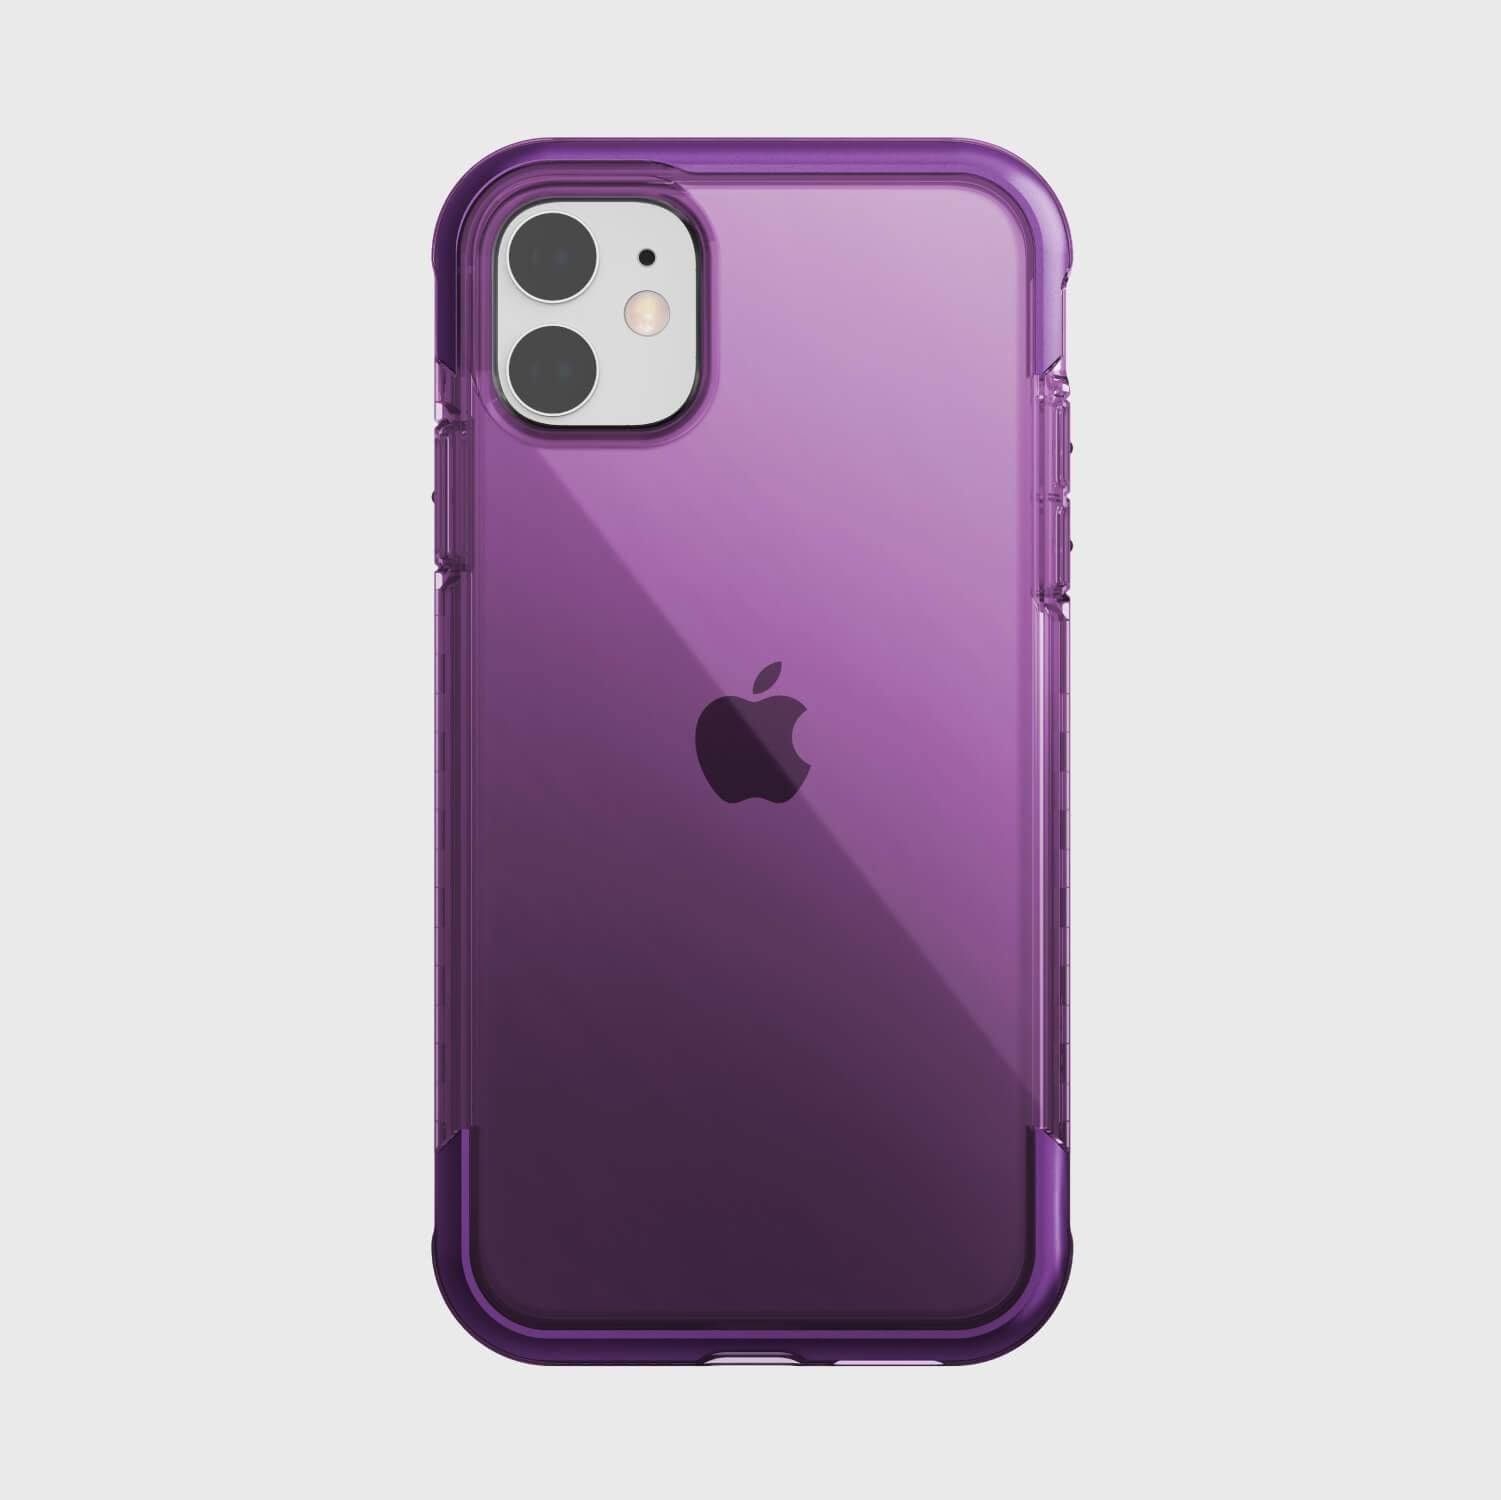 The Raptic iPhone 11 Pro Case - AIR provides drop protection on a white background.